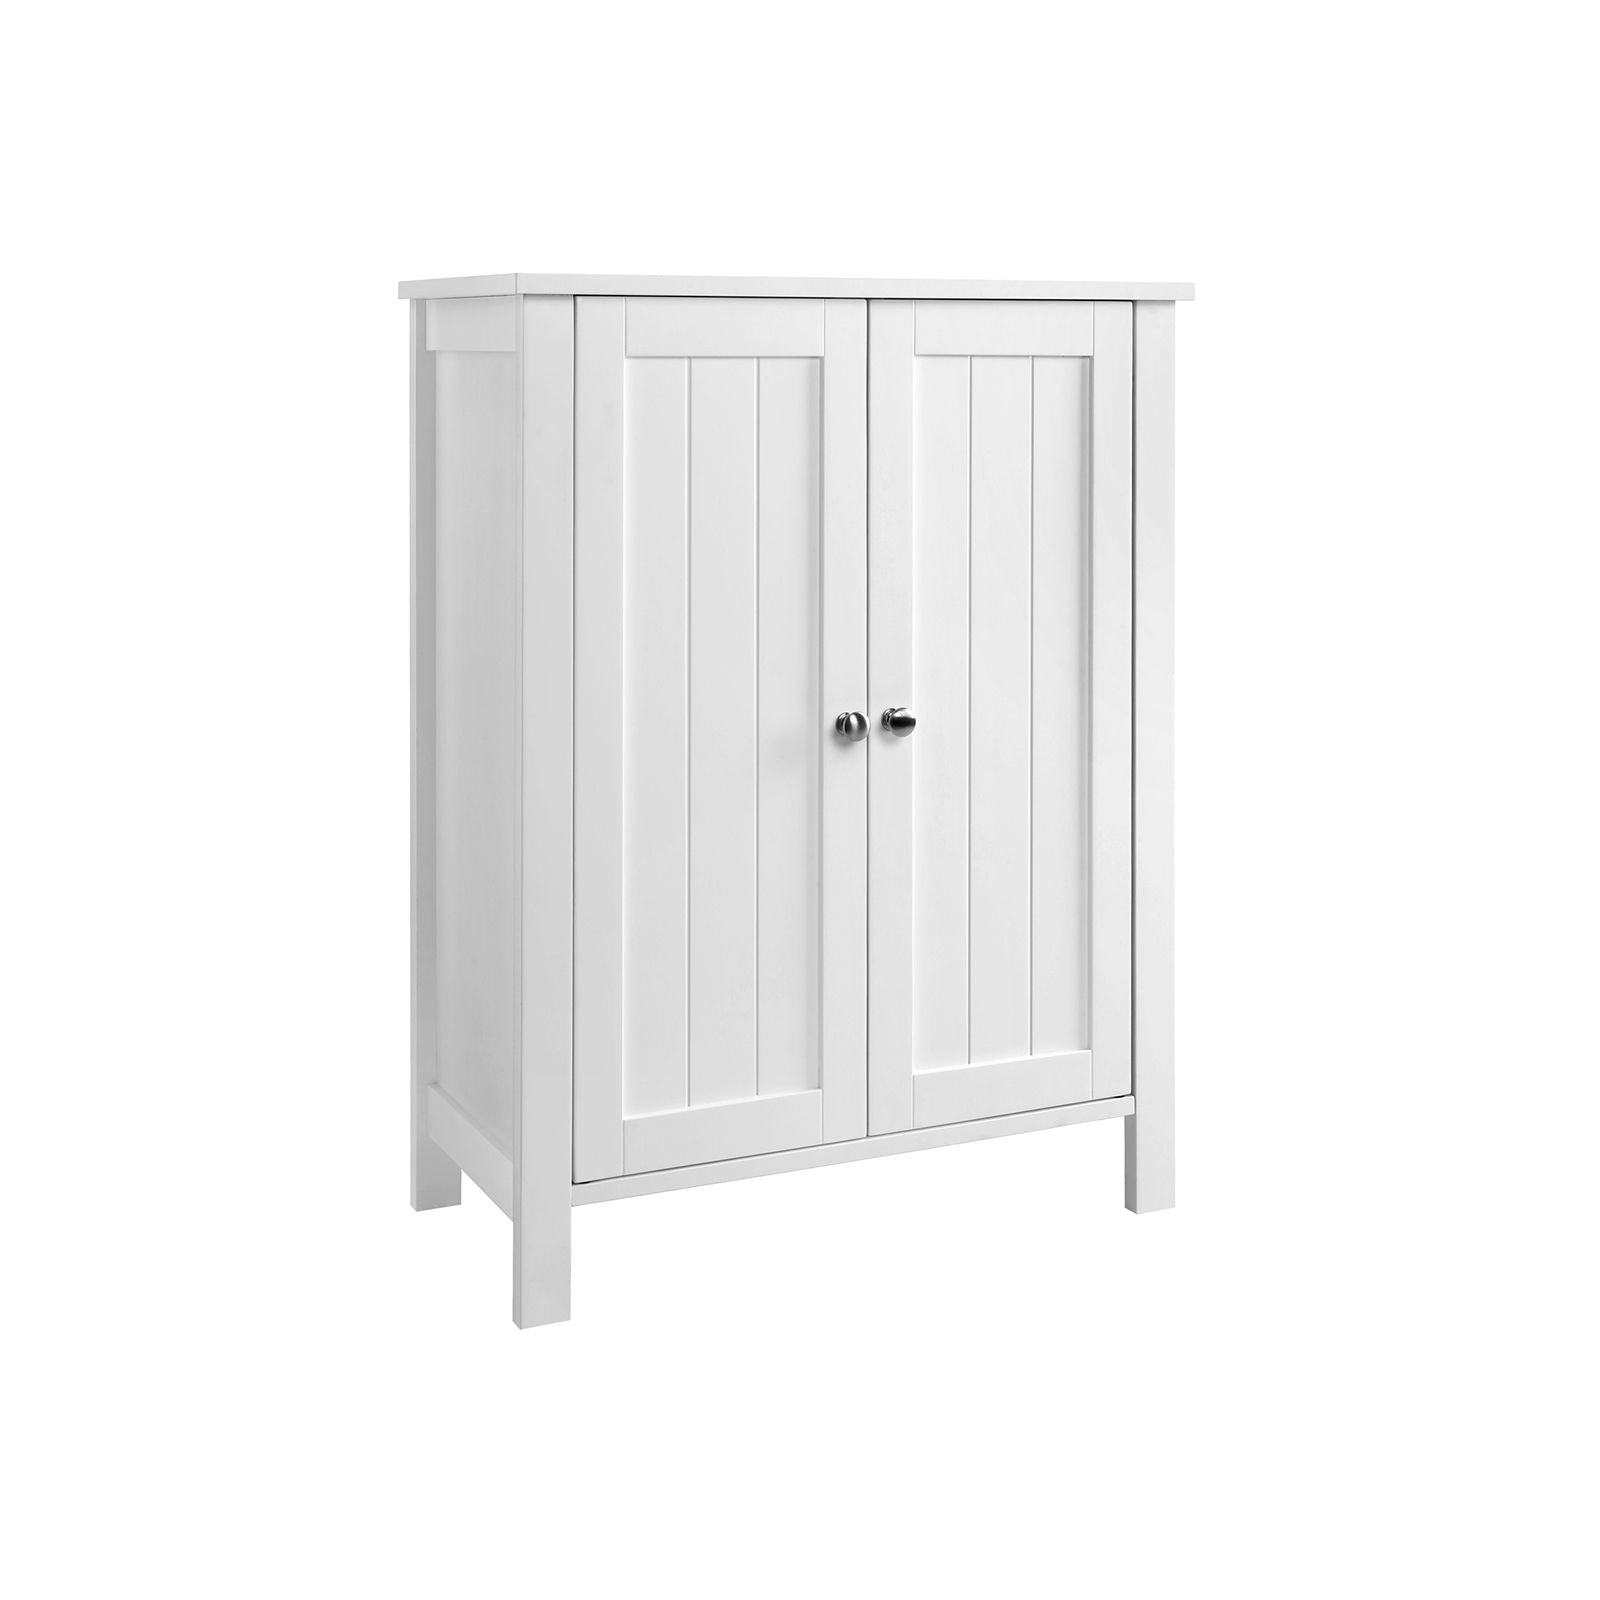 Image of Songmics - Freestanding Bathroom Cabinet Storage Cupboard Unit with 2 Doors and 2 Adjustable Shelves White BCB60W